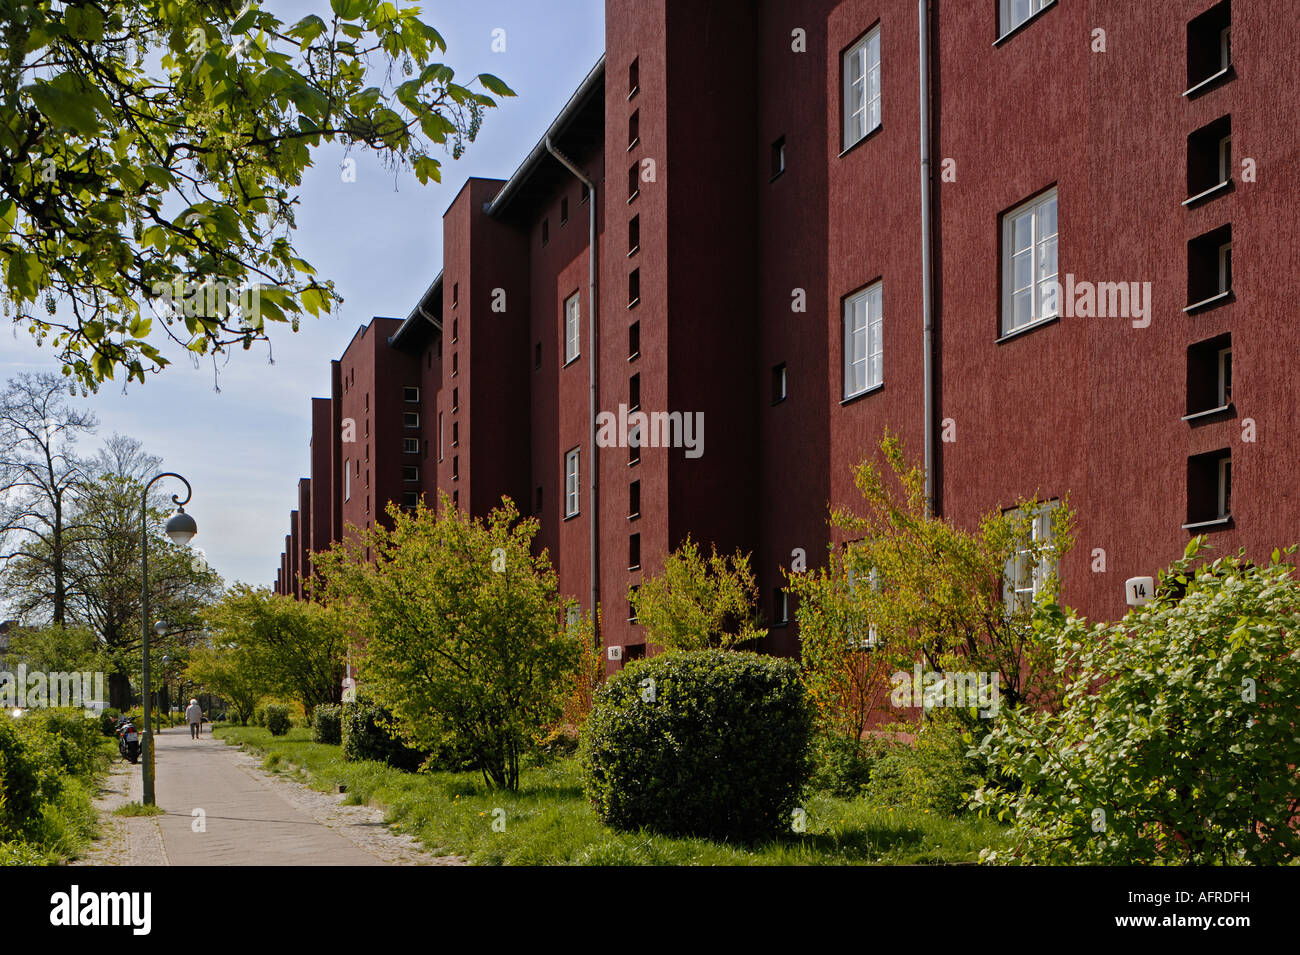 Berlin. Hufeisensiedlung. Horseshoe Estate by Bruno Taut. The Red Front building. Fritz-Reuter-Allee. Stock Photo